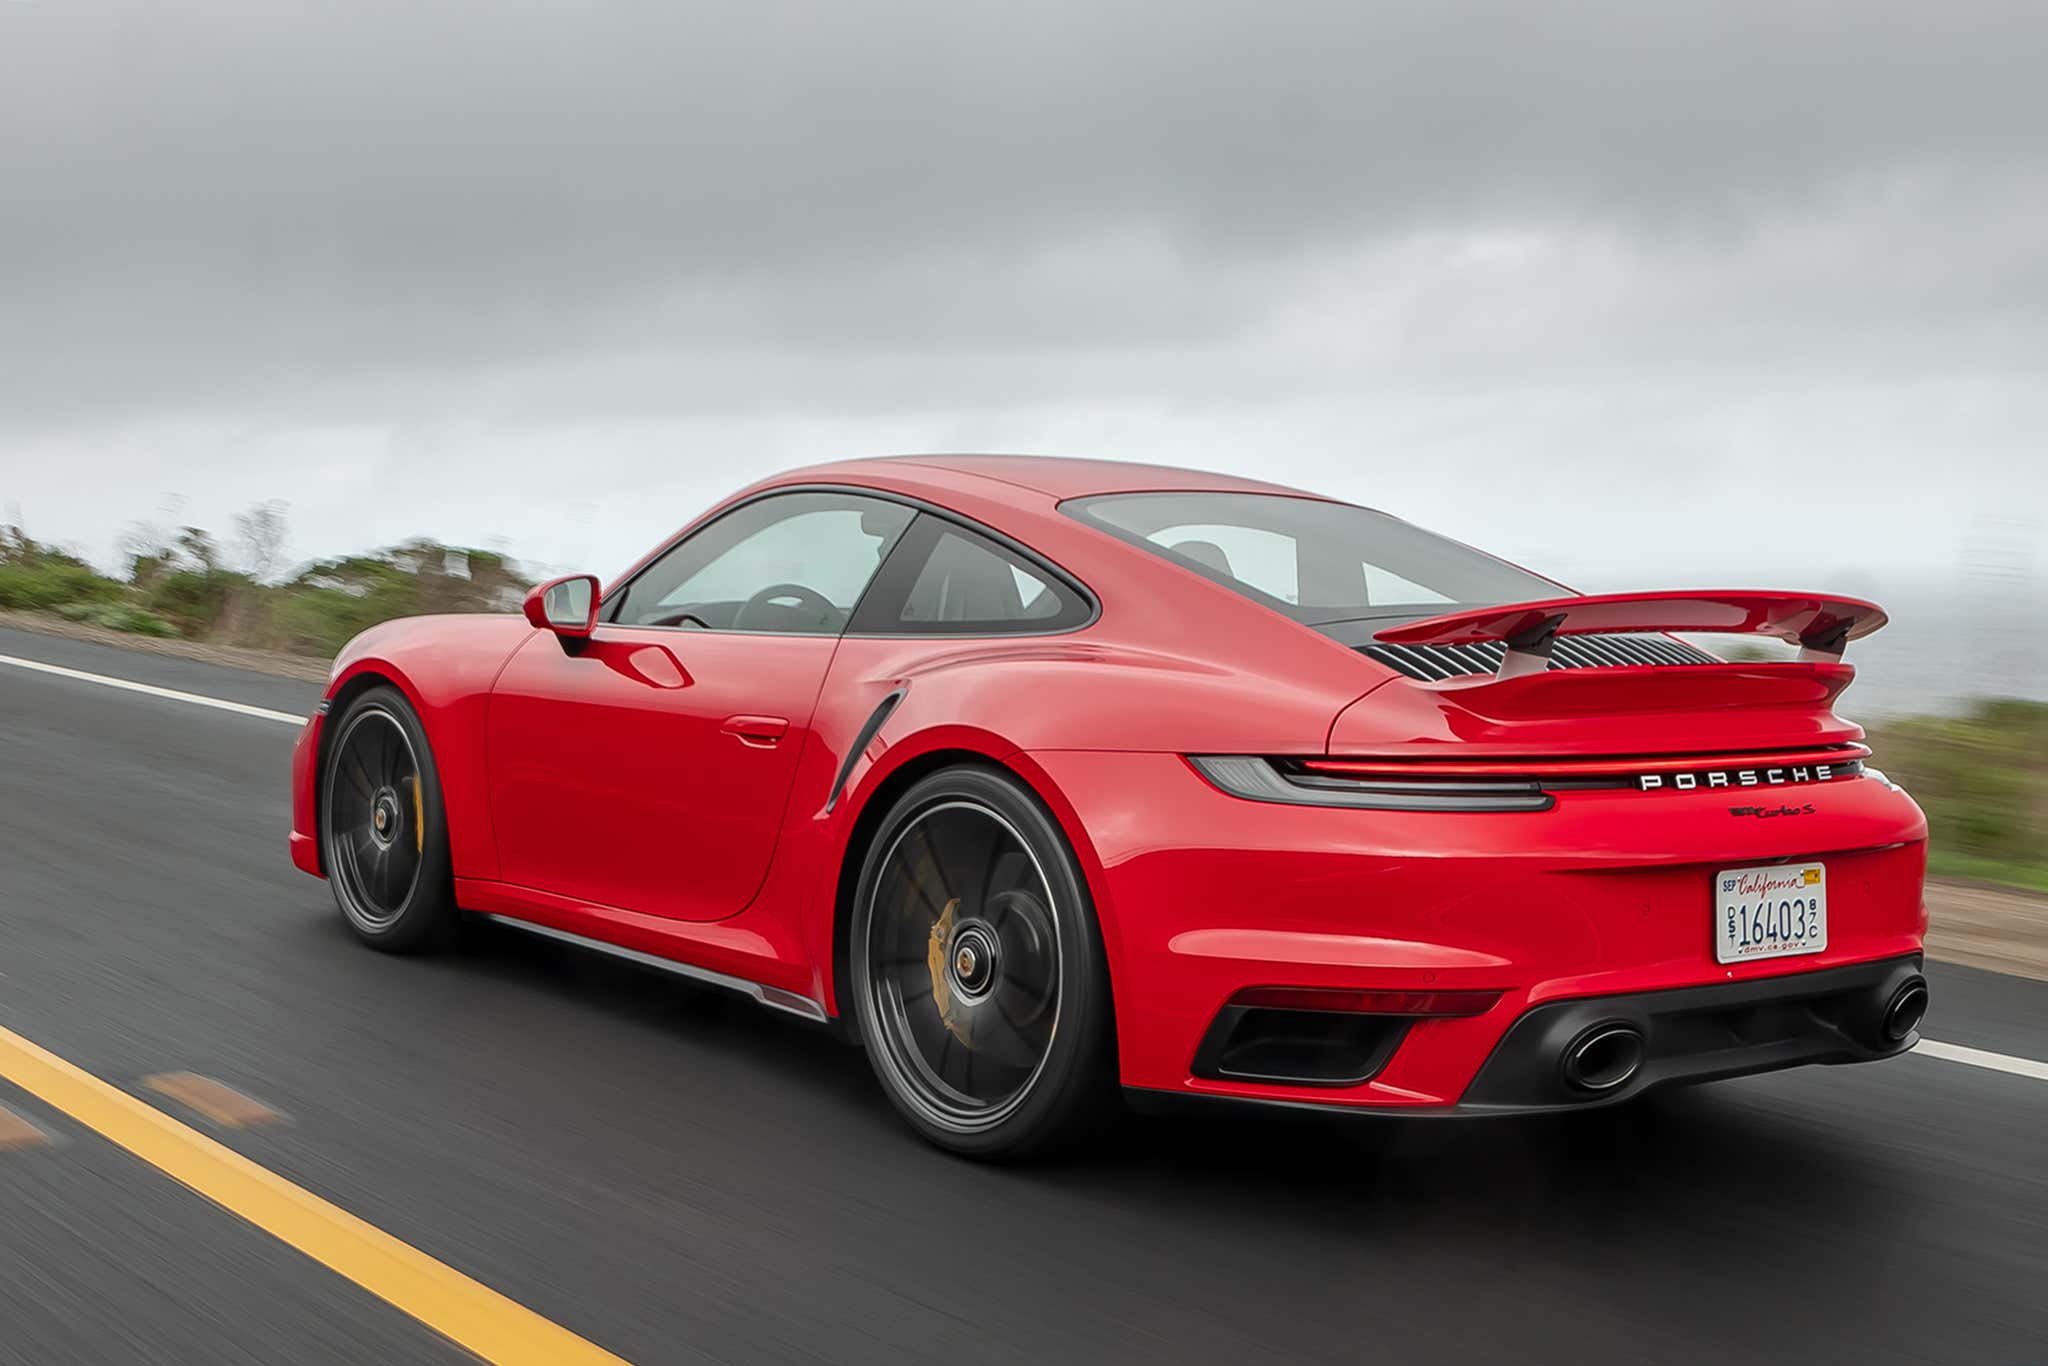 IT’S OFFICIAL -THE PORSCHE 911 IS THE ‘MIDLIFE CRISIS’ CAR